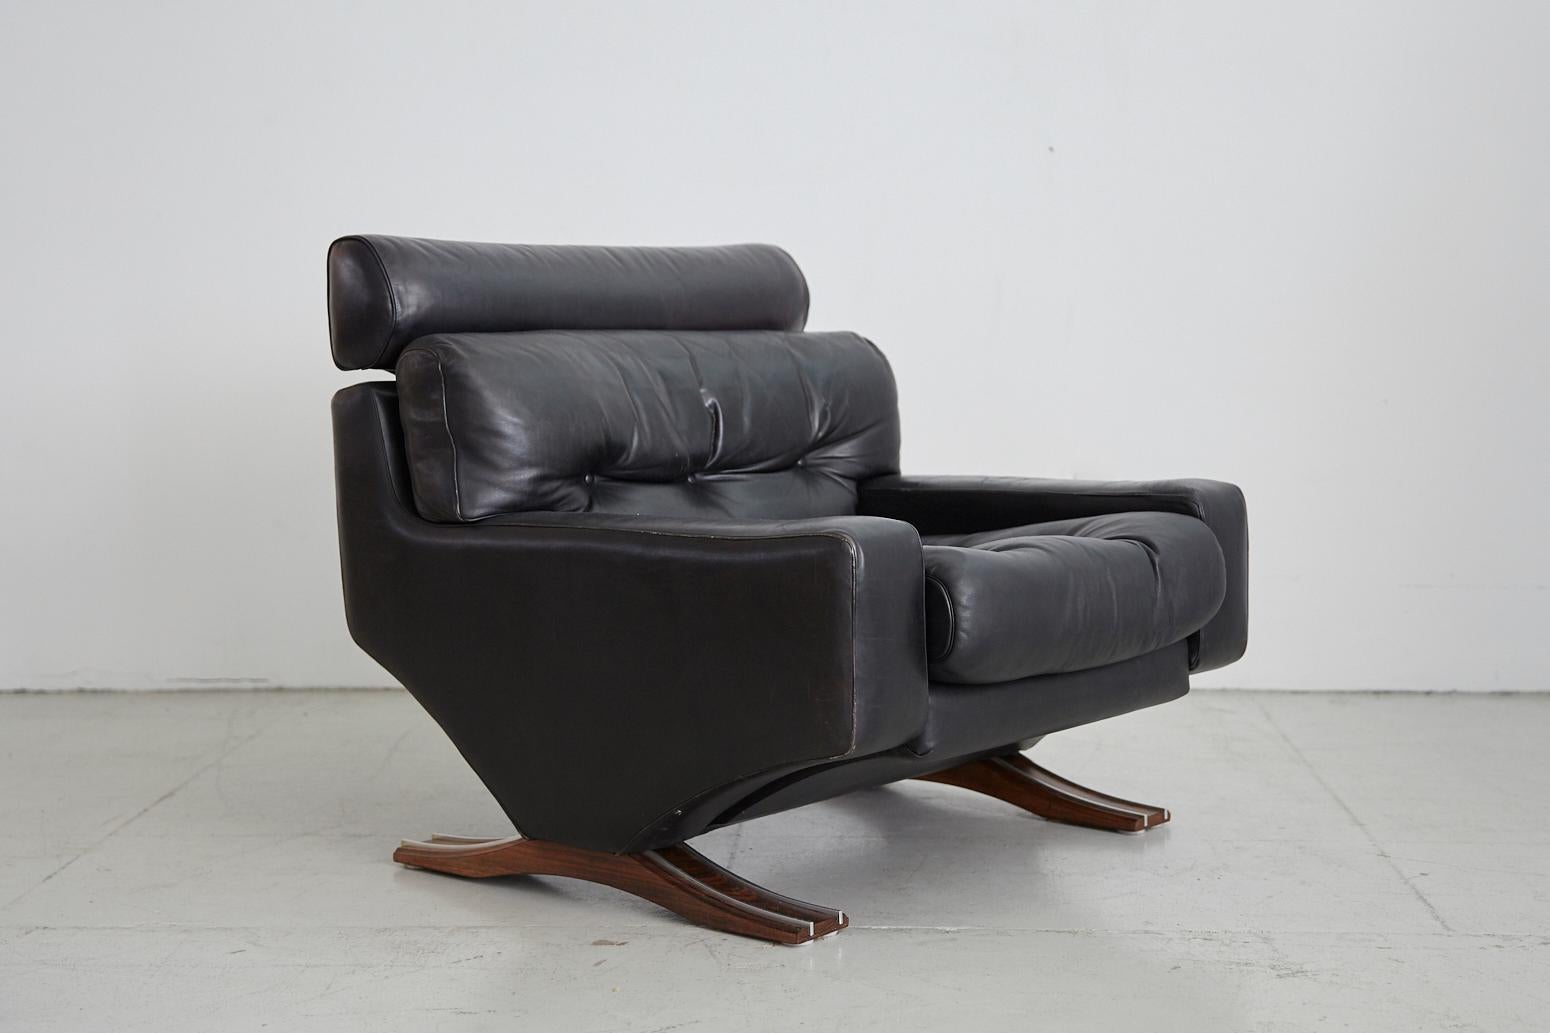 Handsome Italian leather armchair with original black leather cushioned seat resting on rosewood and aluminum legs. Great tufting detail and extremely comfortable.